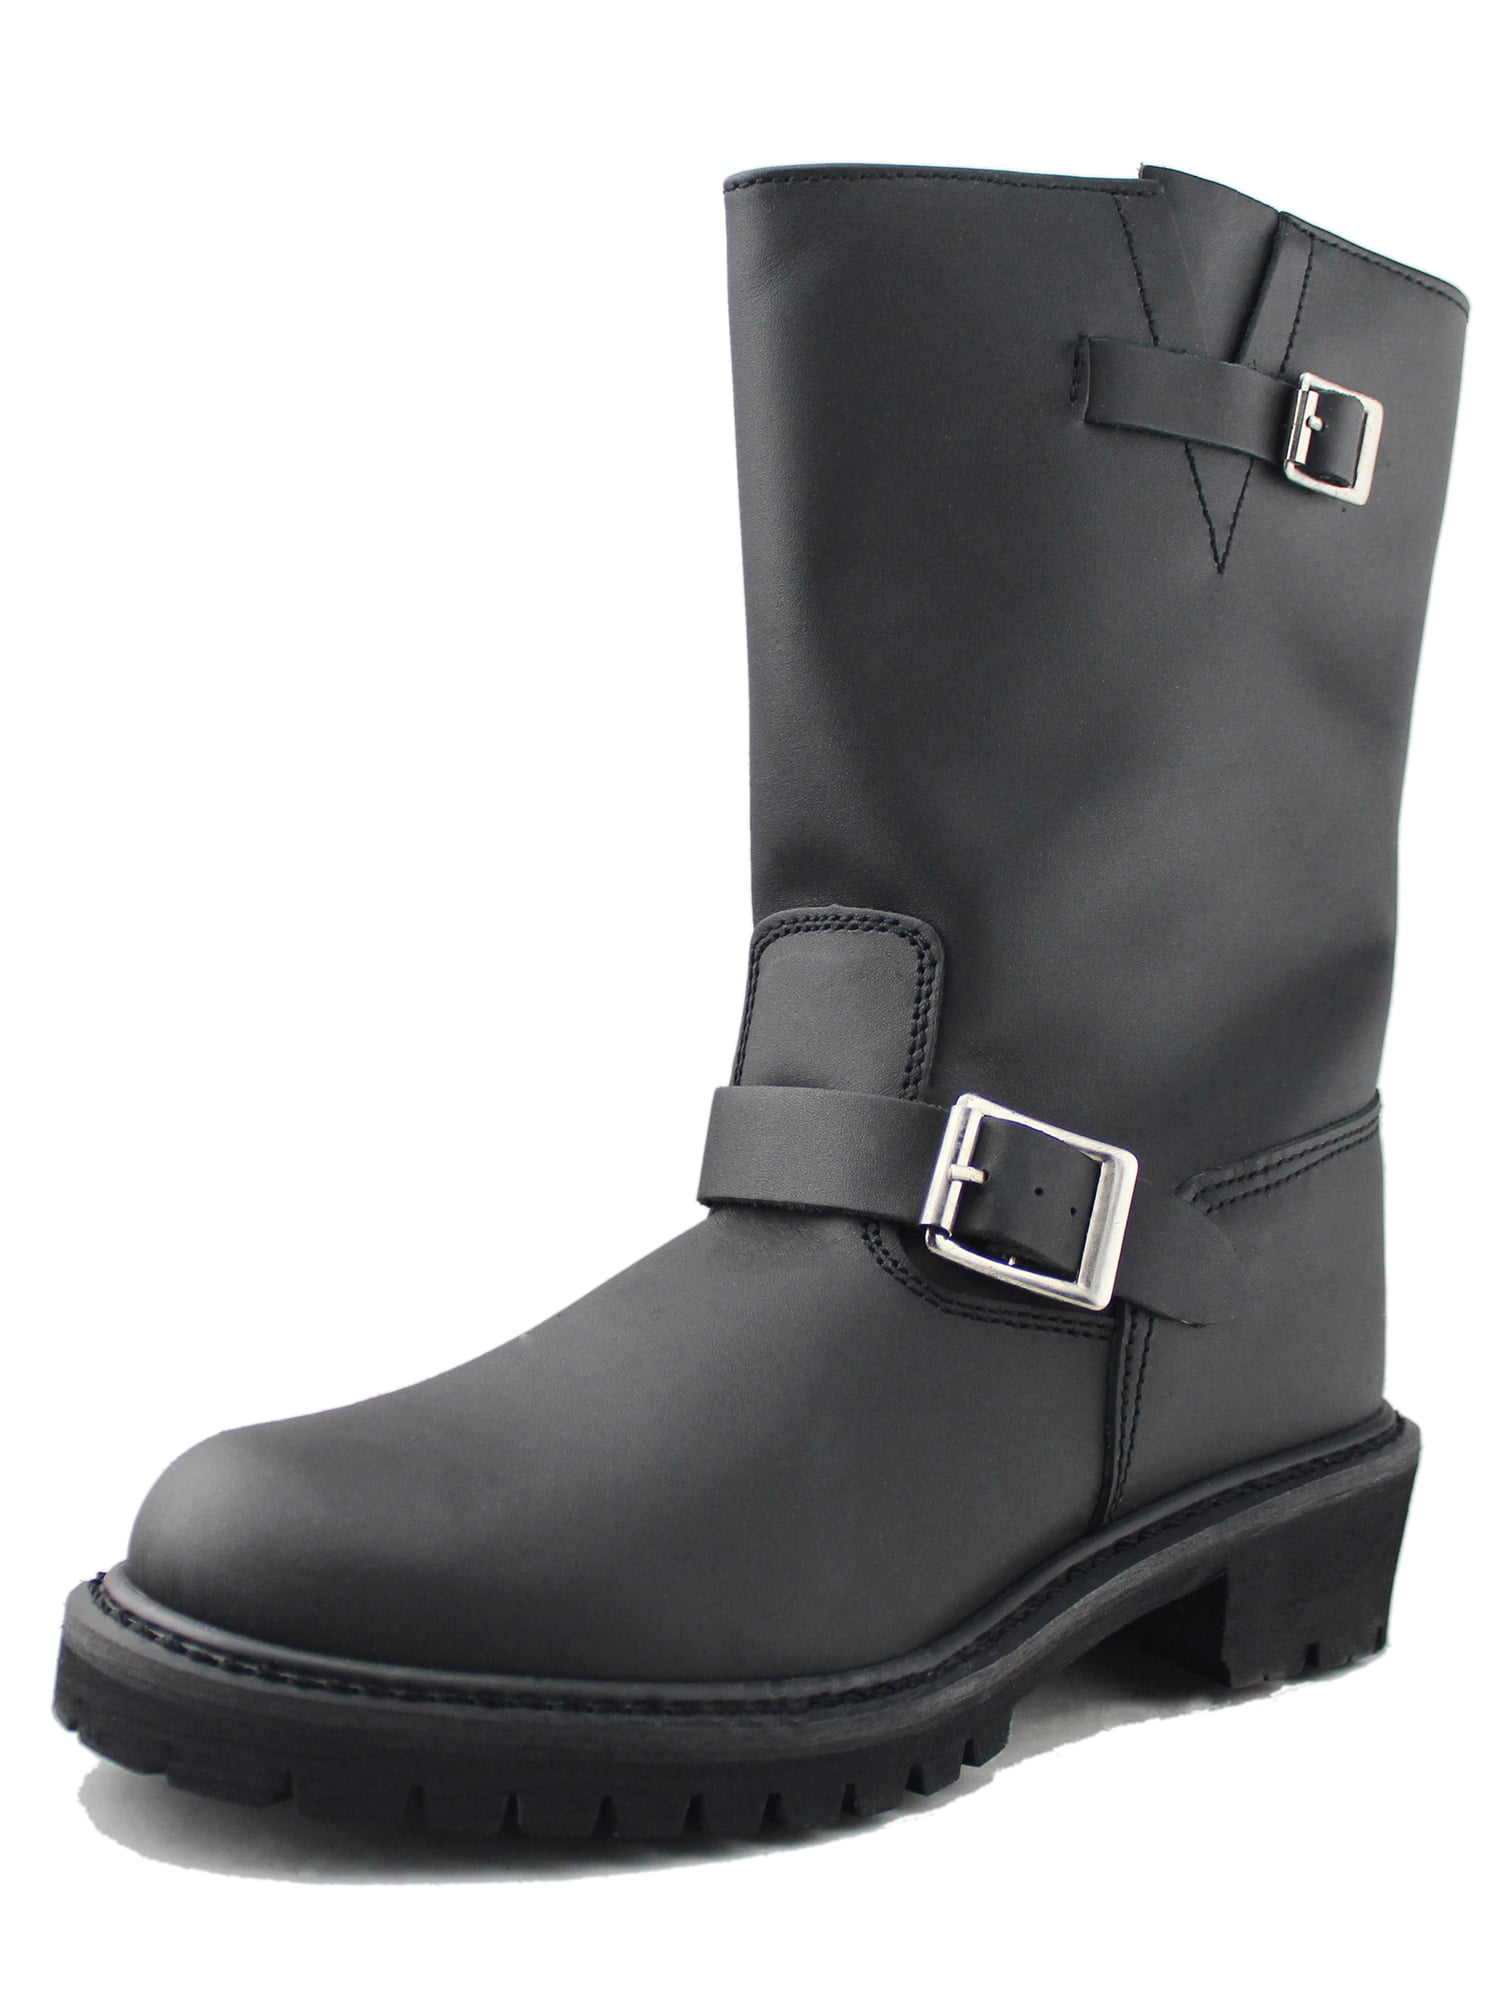 pull on work boots black